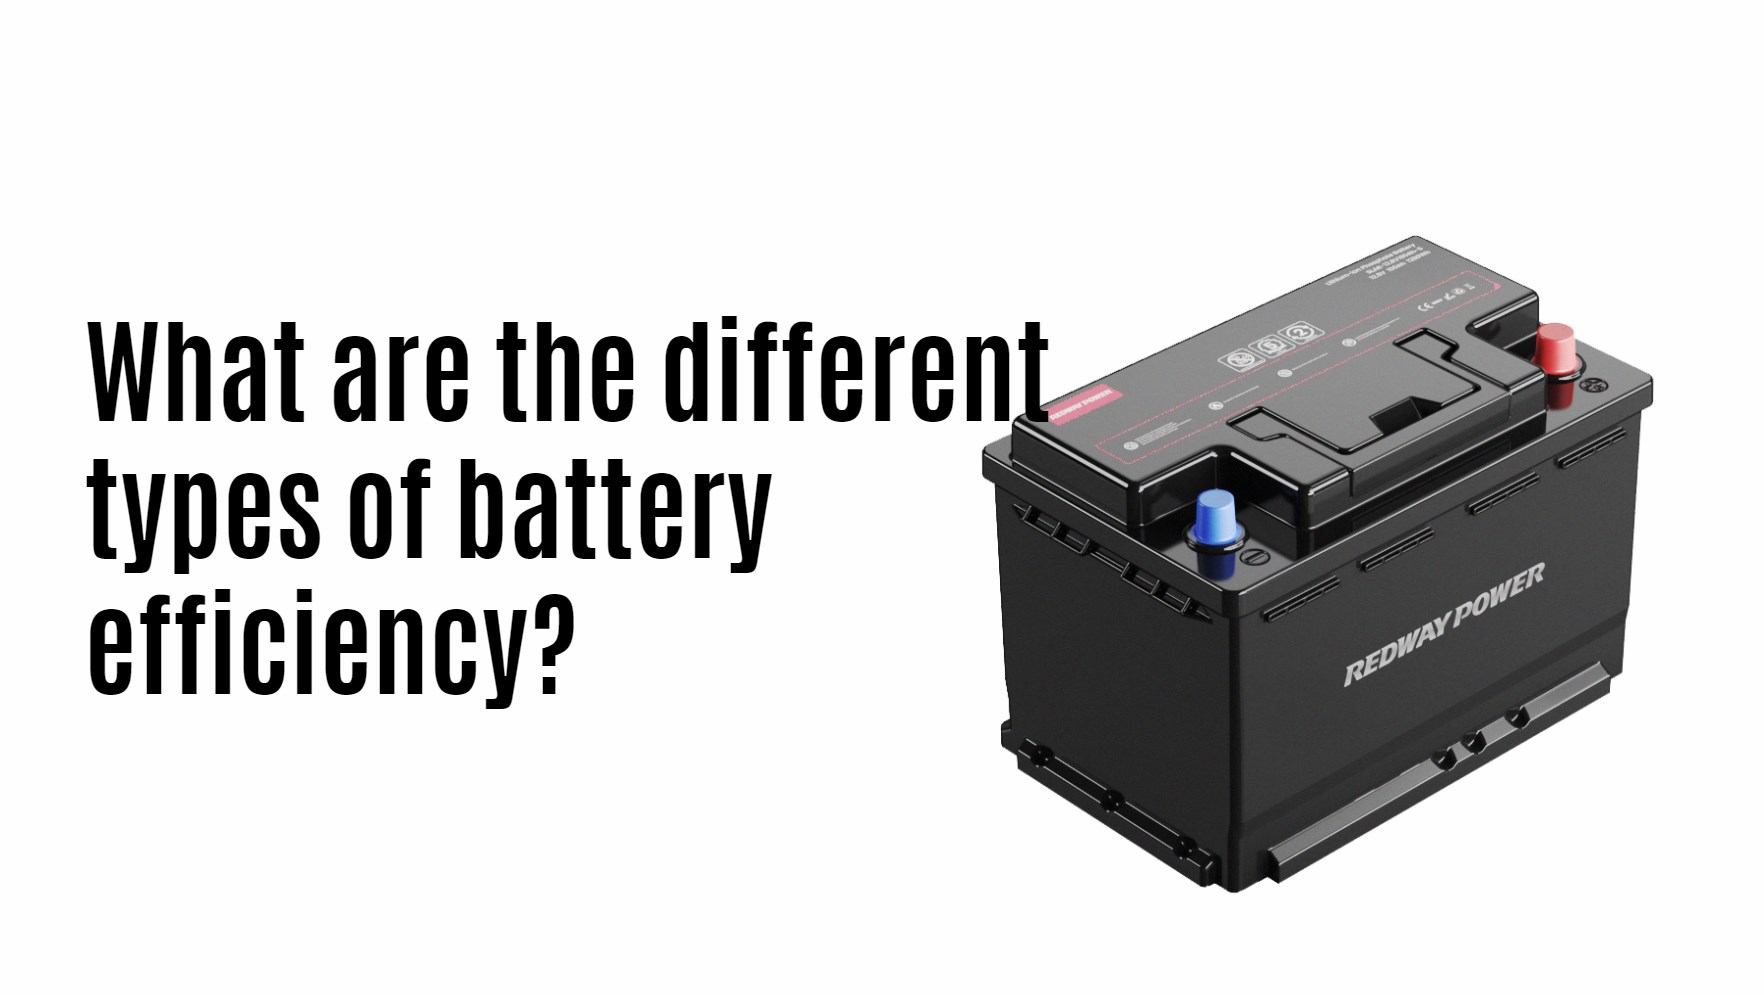 What are the different types of battery efficiency?